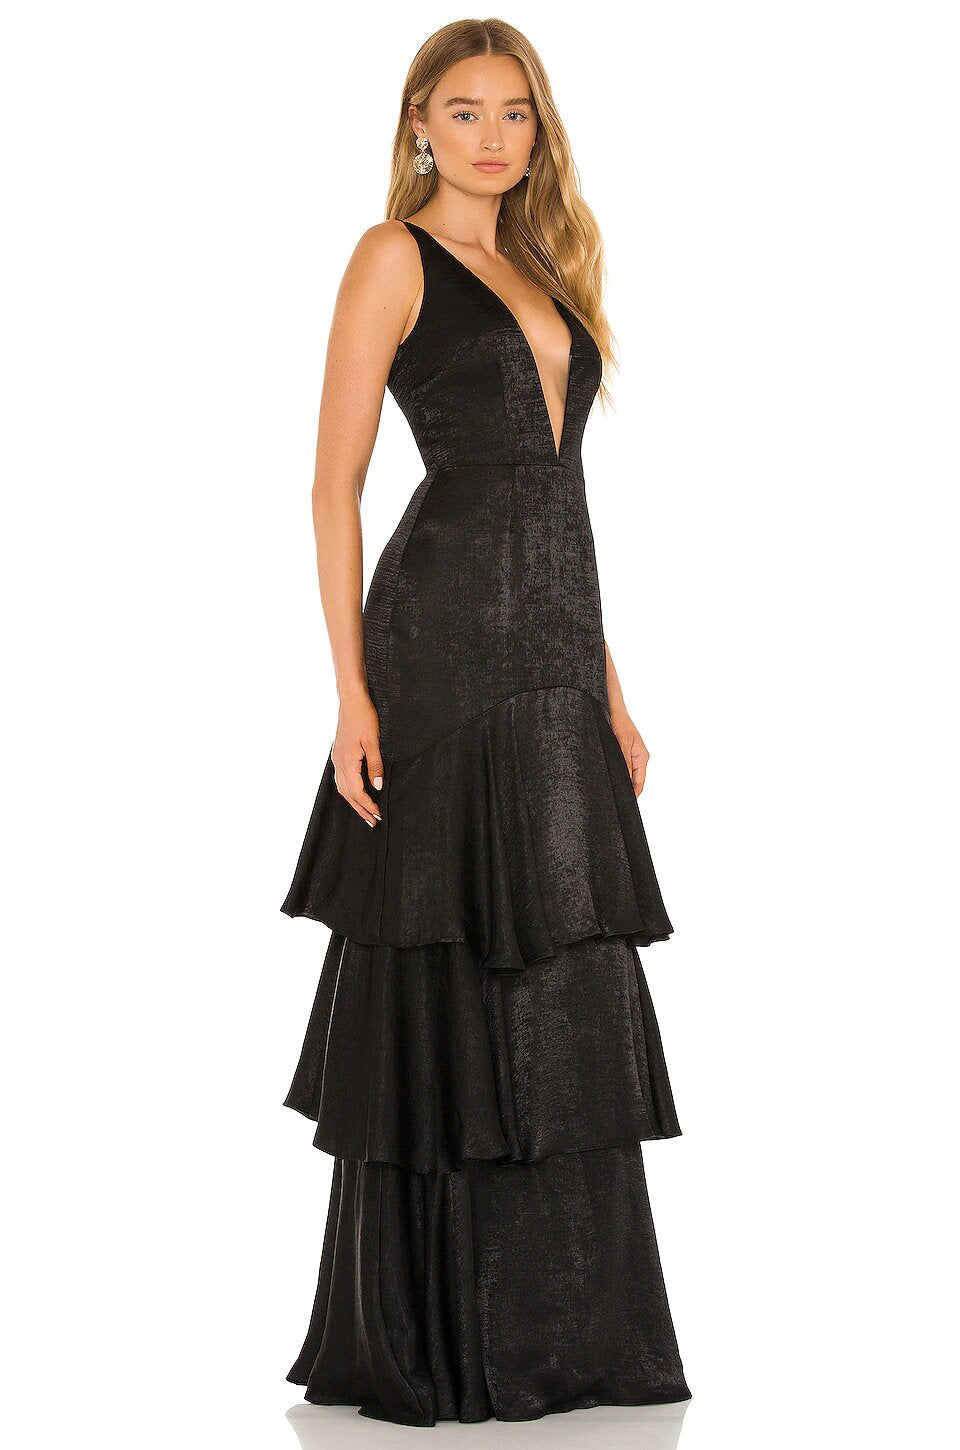 Katie May  - Old Money Gown - Black